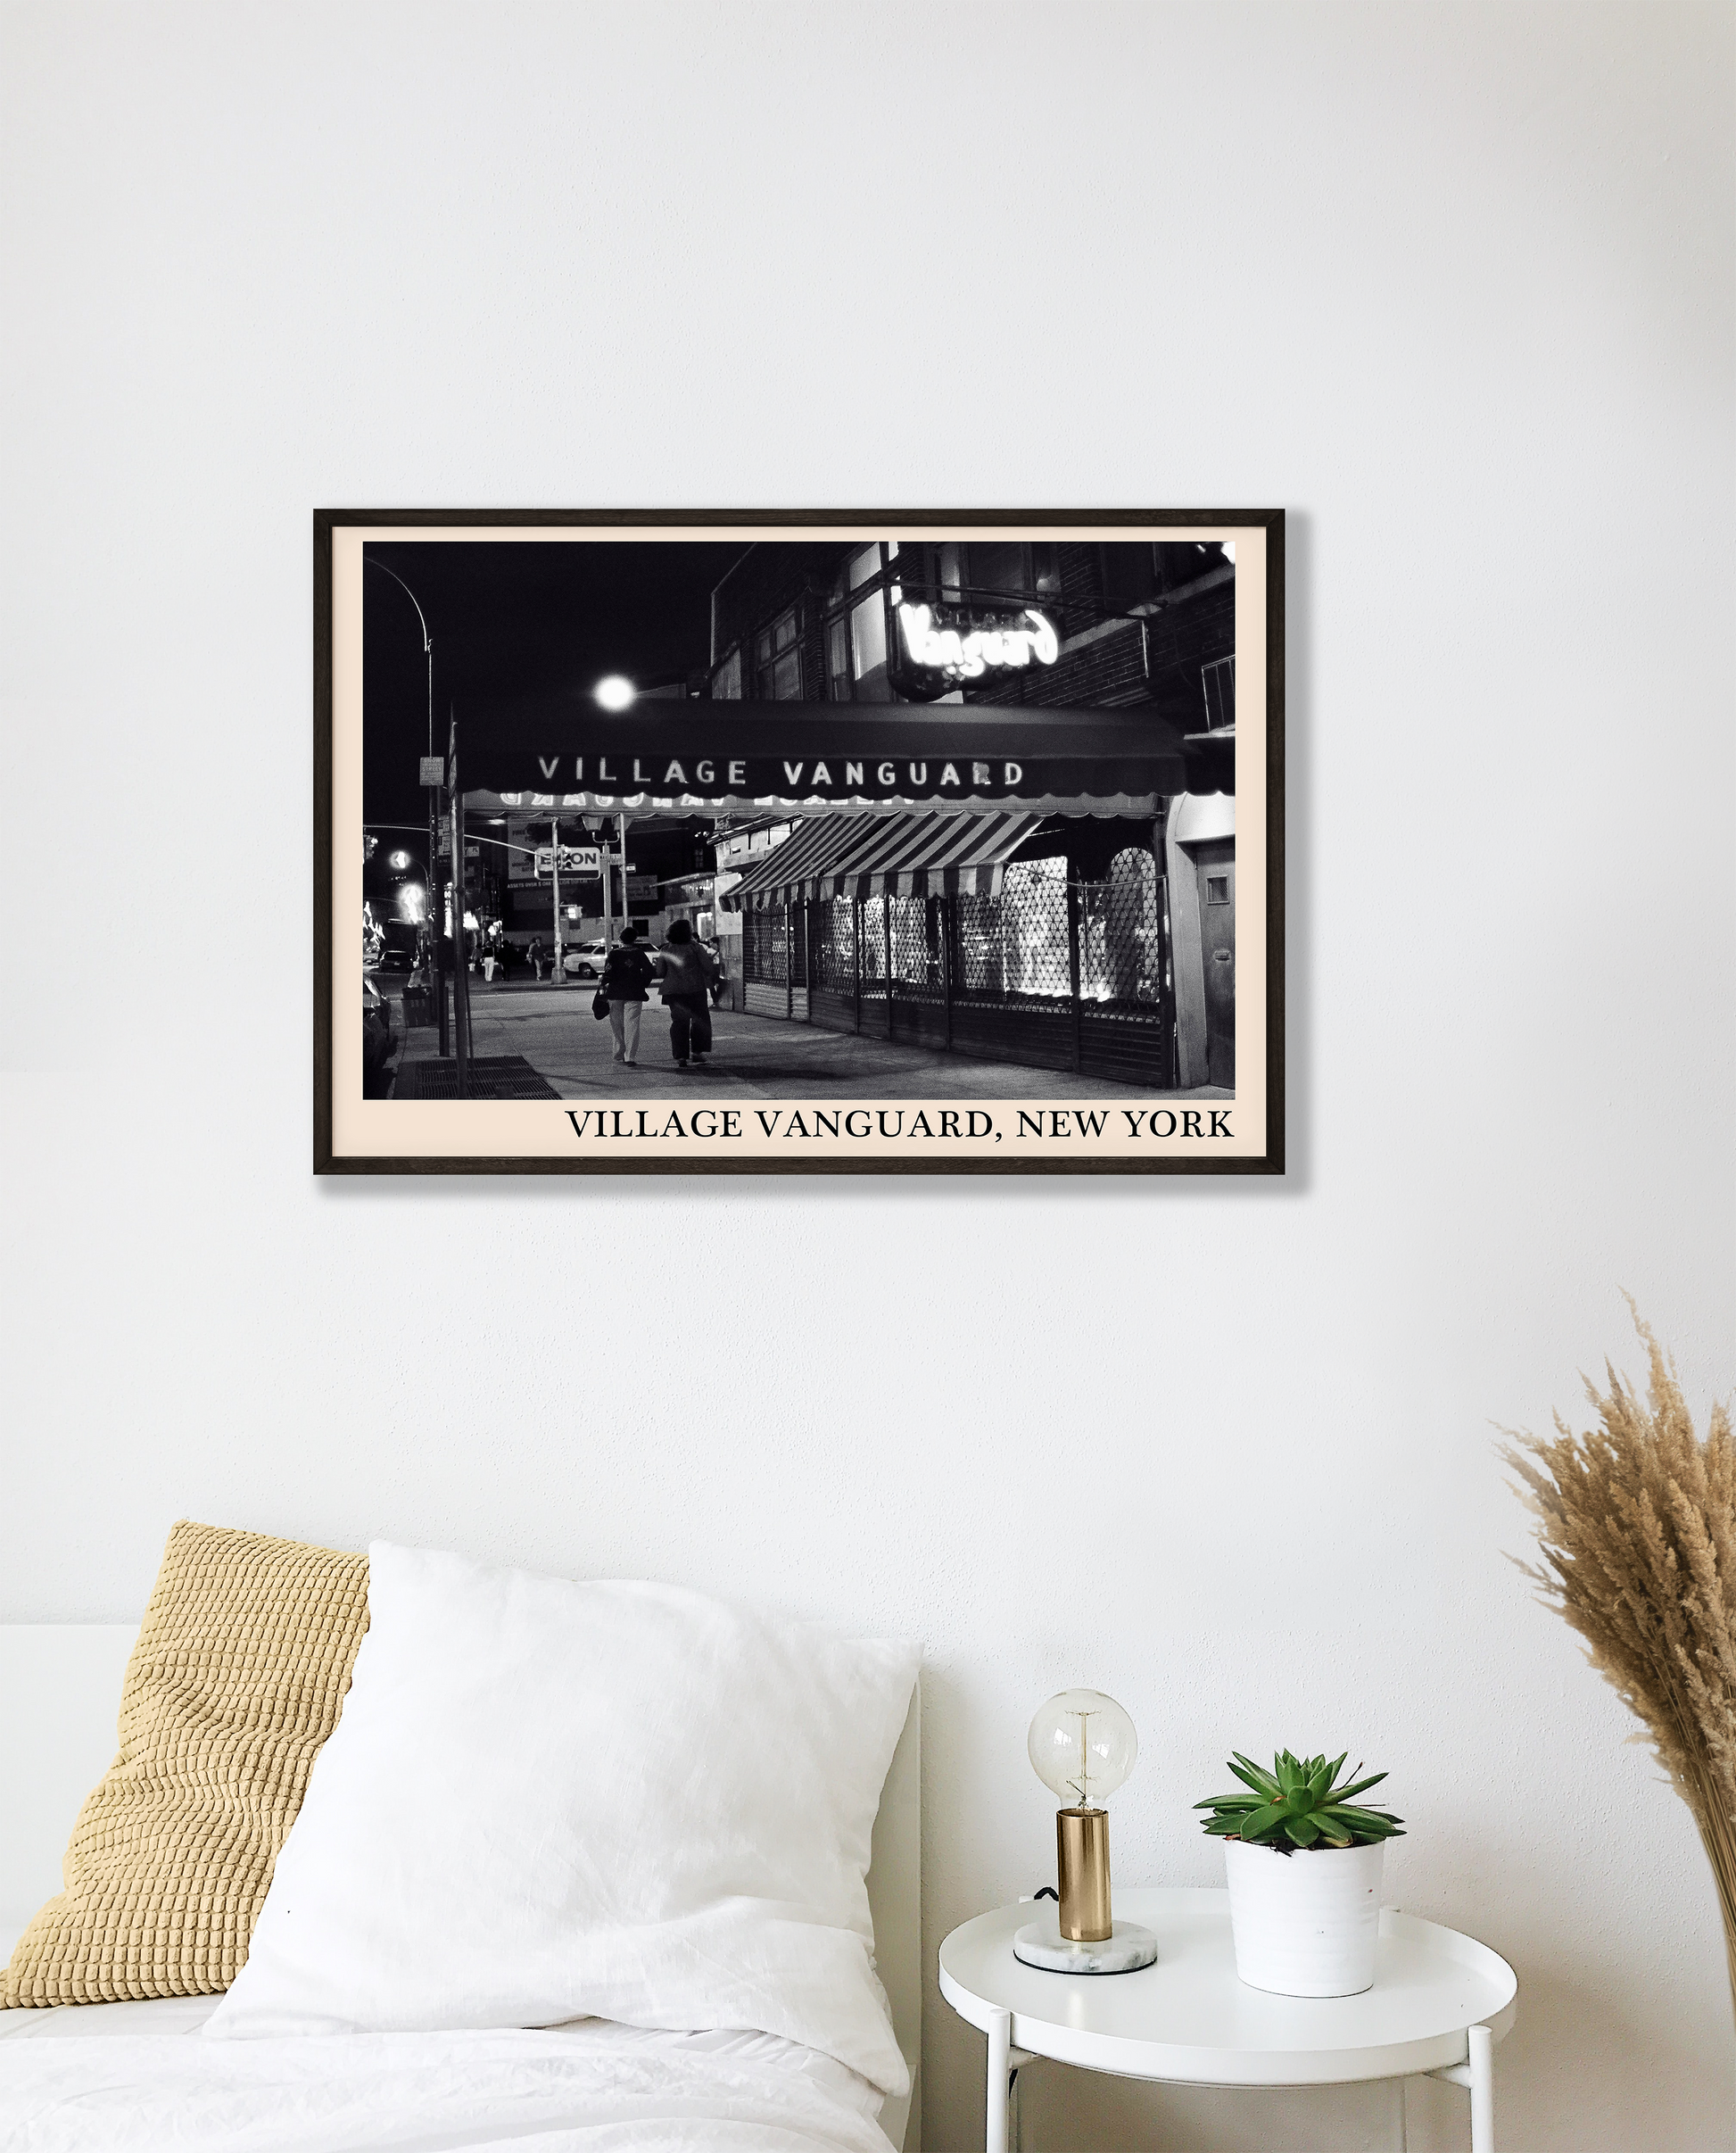 Iconic photo of Village Vanguard in New York taken by Thomas Marcello and captured in a retro black framed jazz print, hanging on a white bedroom wall